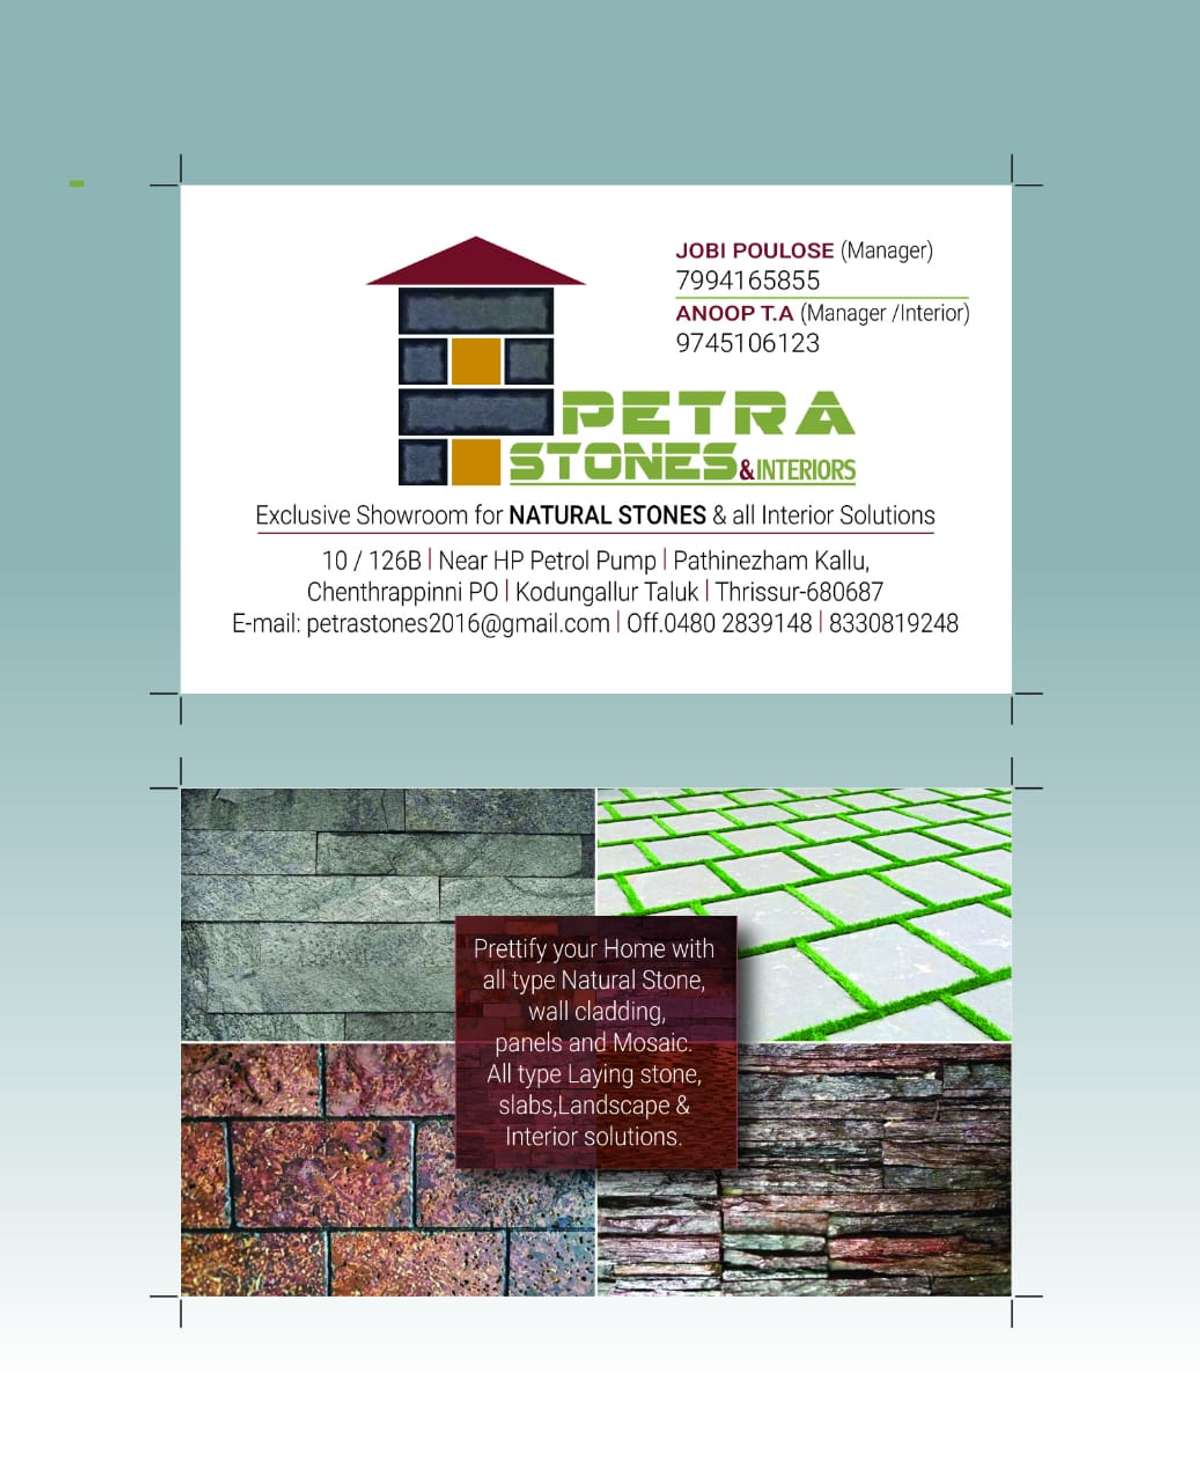 Beautiful work Ma'am,
We are from PETRA STONES, if you have any Natural stone wall panels and paving works please contact us. our business card is attached below